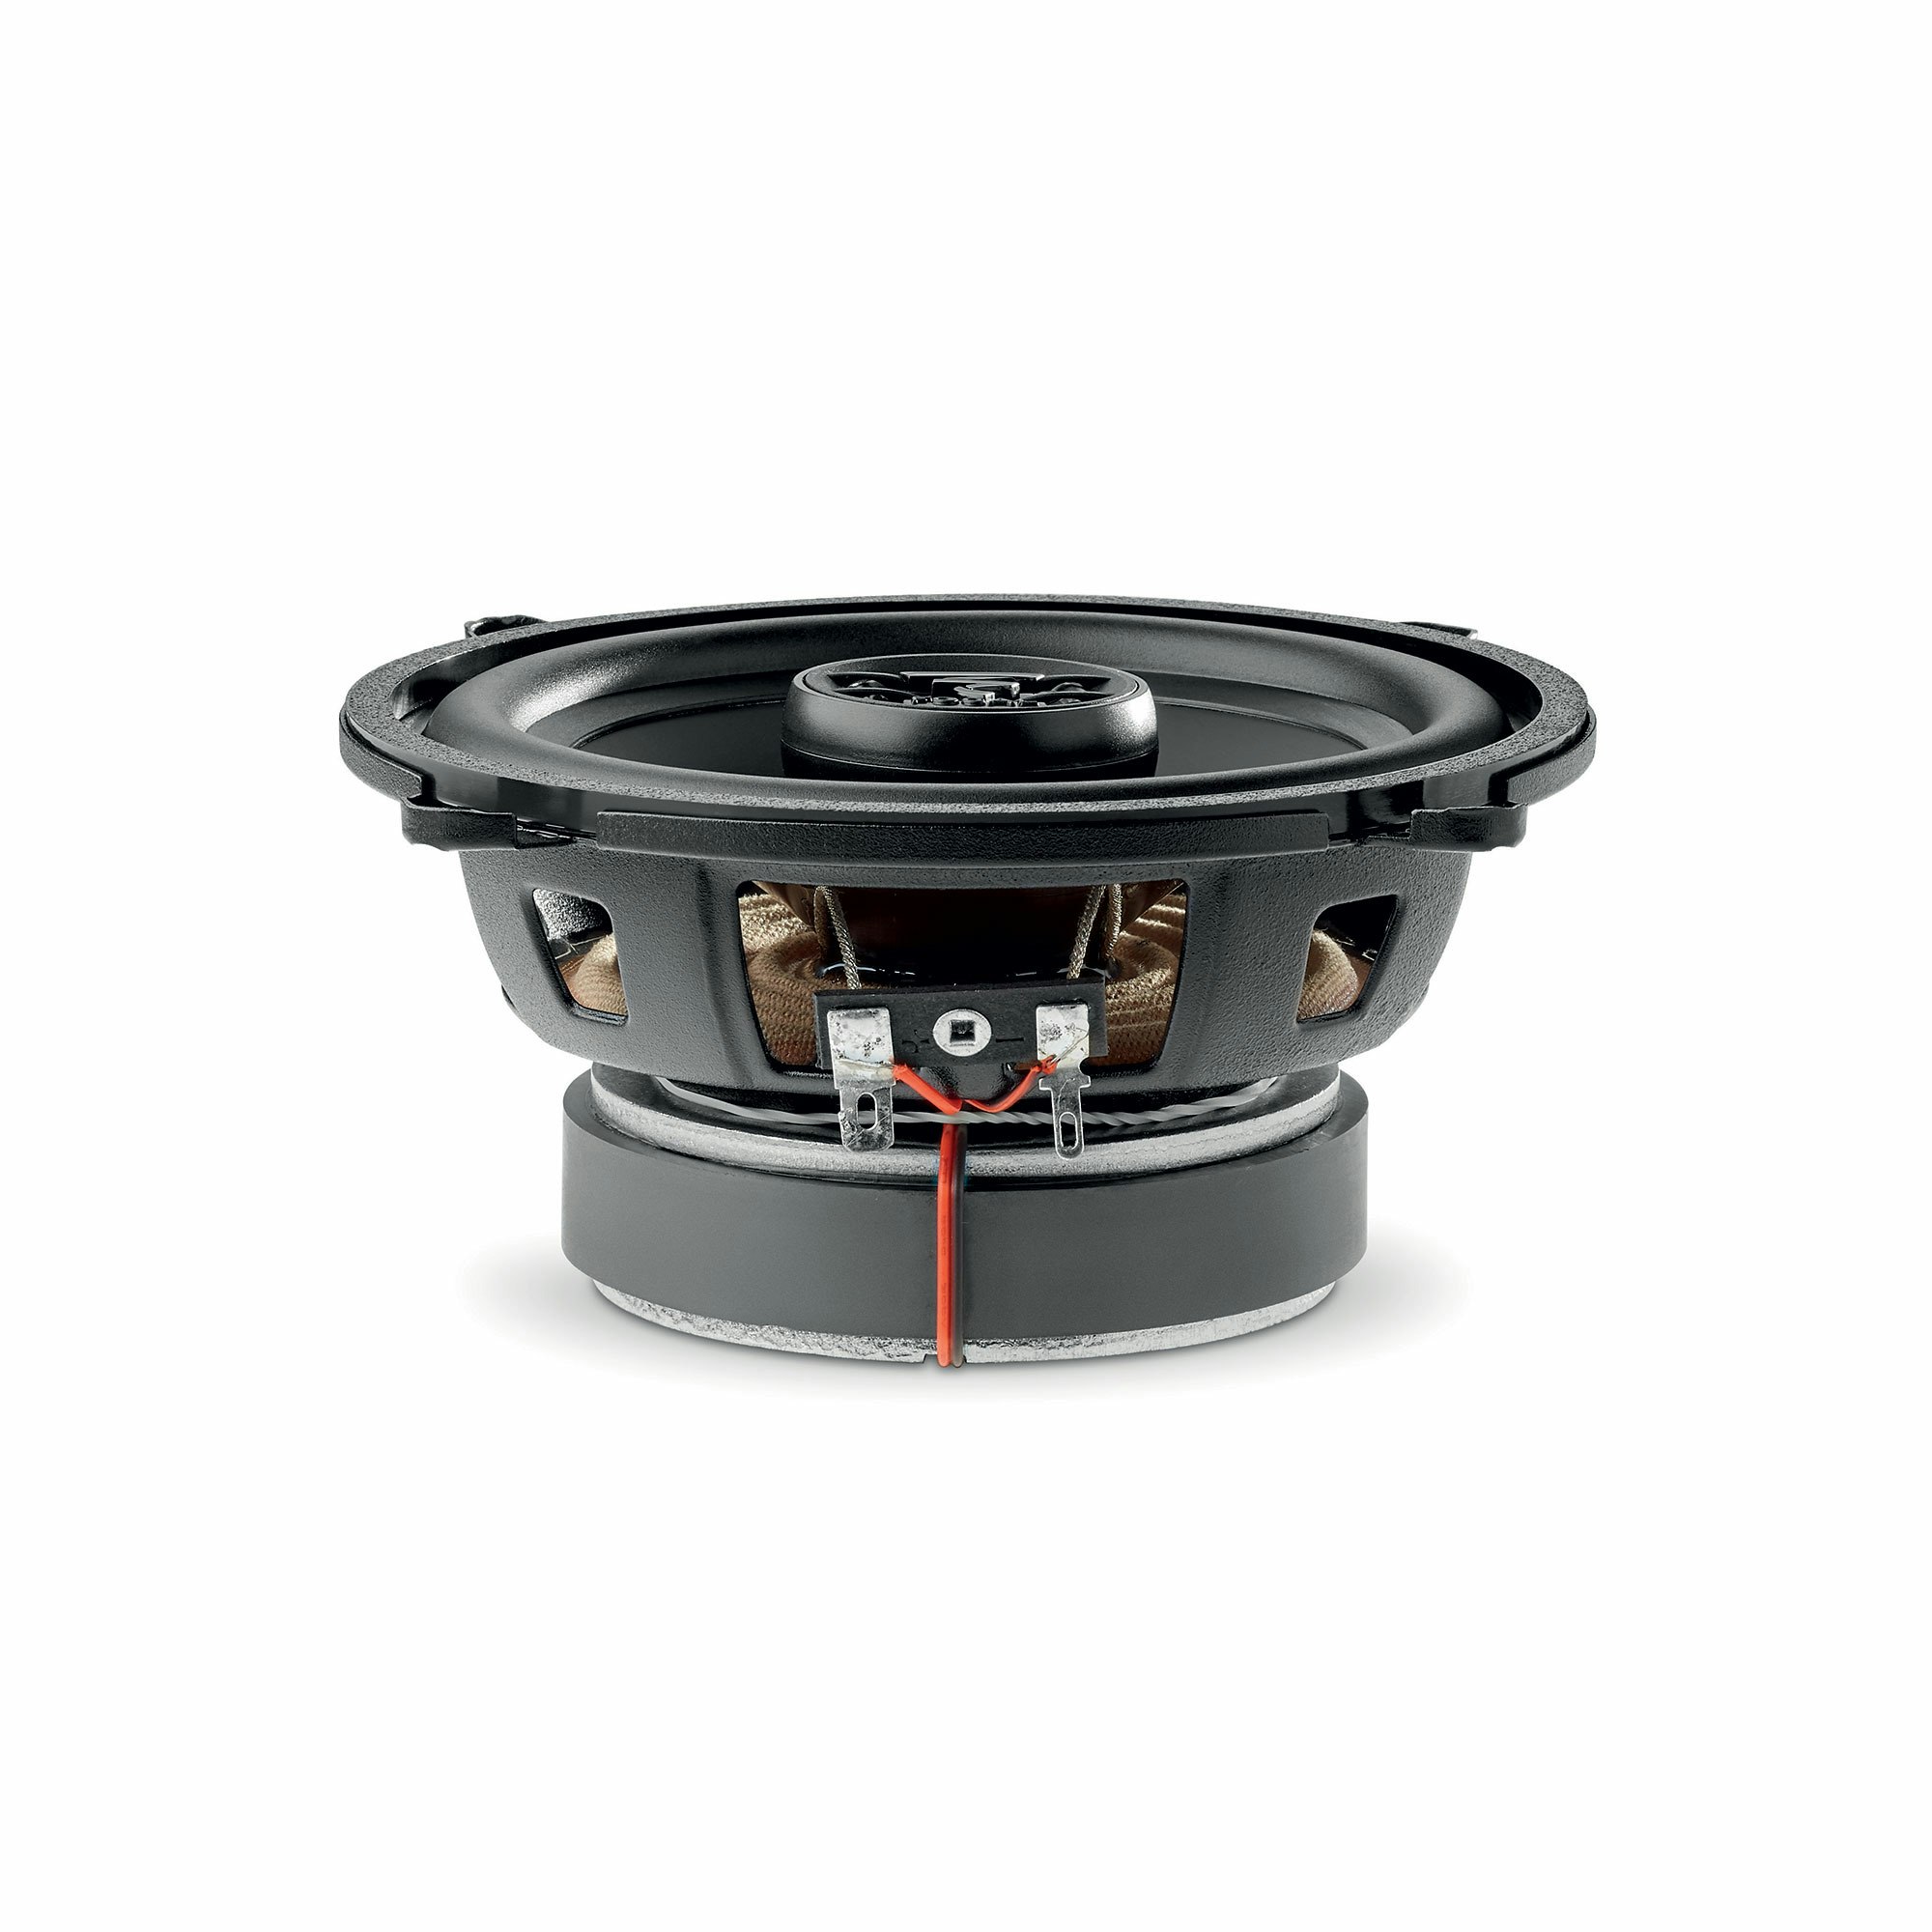 Focal Auditor ACX130